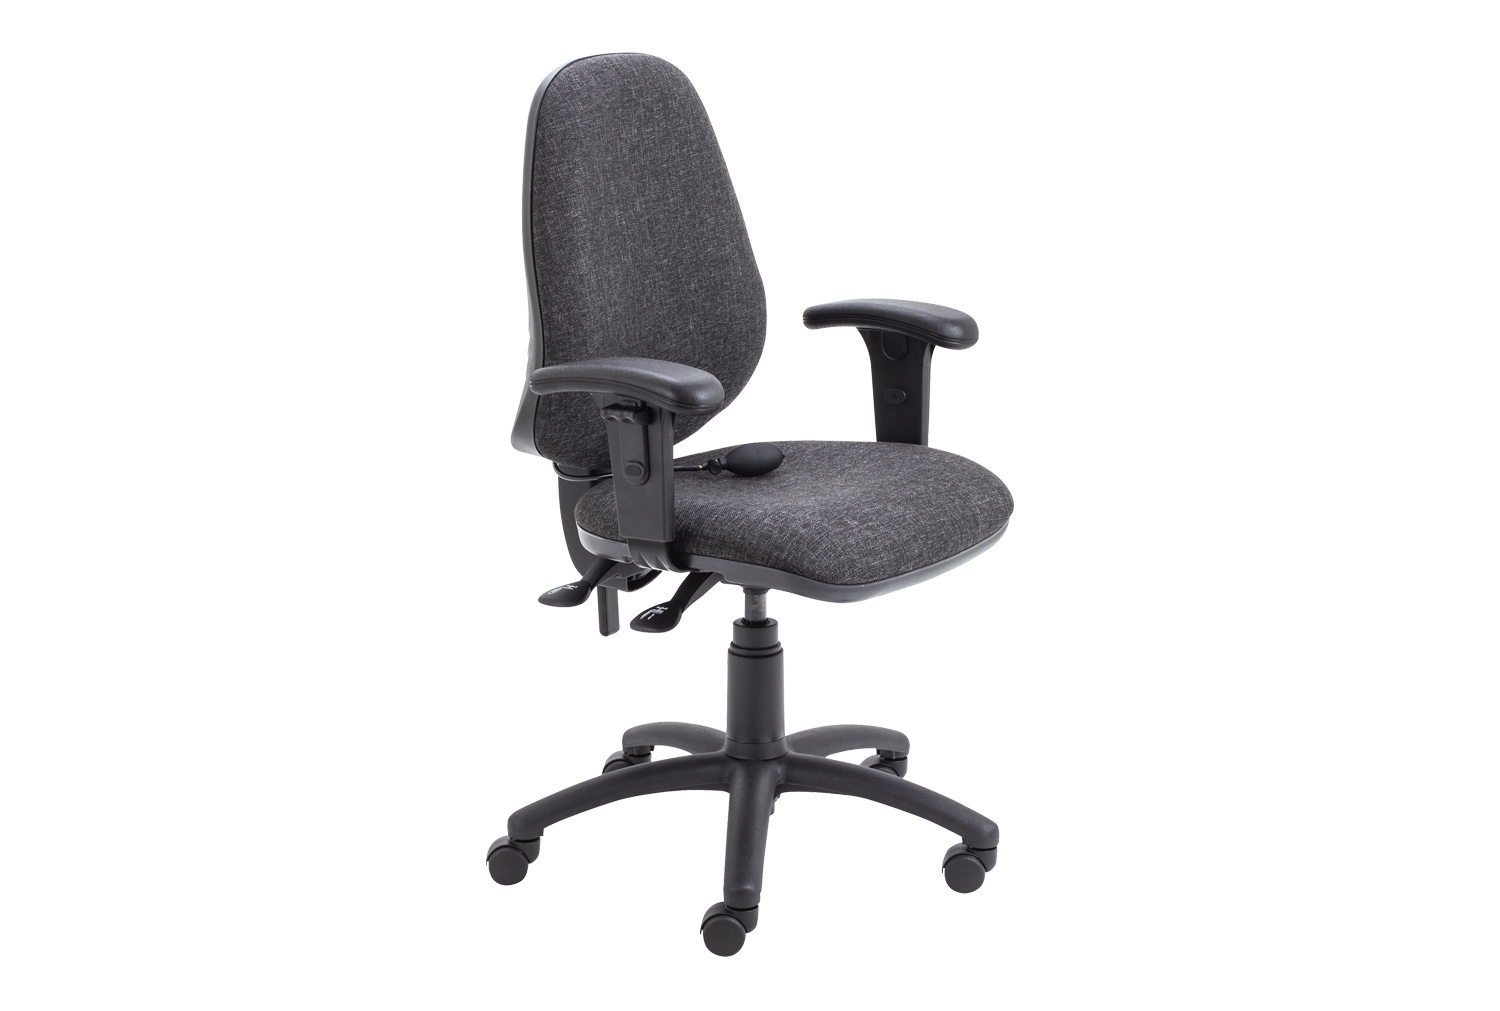 Orchid Lumbar Pump Ergonomic Operator Office Chair With Height Adjustable Arms, Charcoal